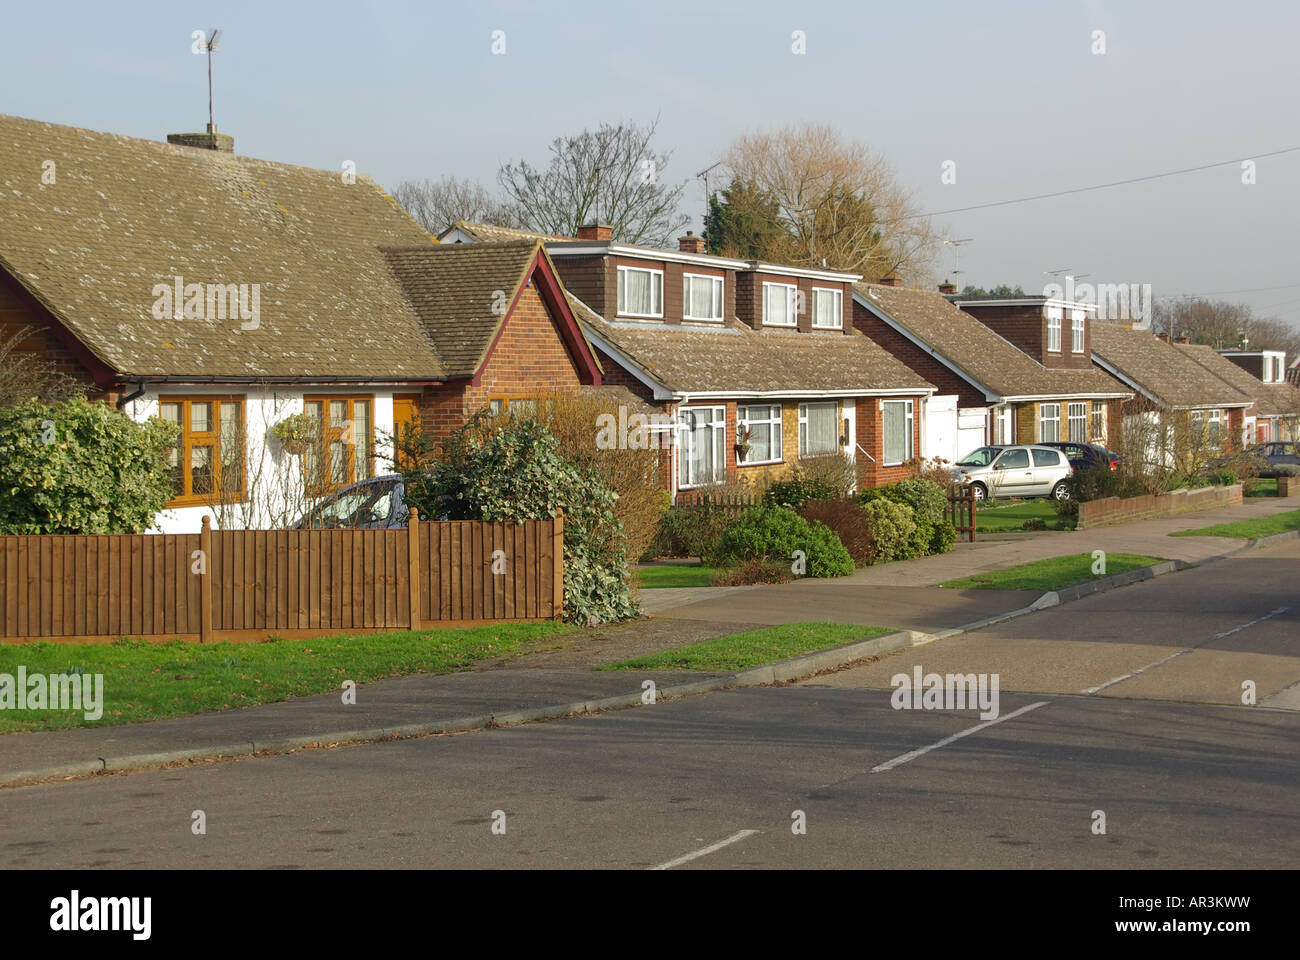 Village residential road detached and semi detached bungalows includes some dormer windows Stock Photo